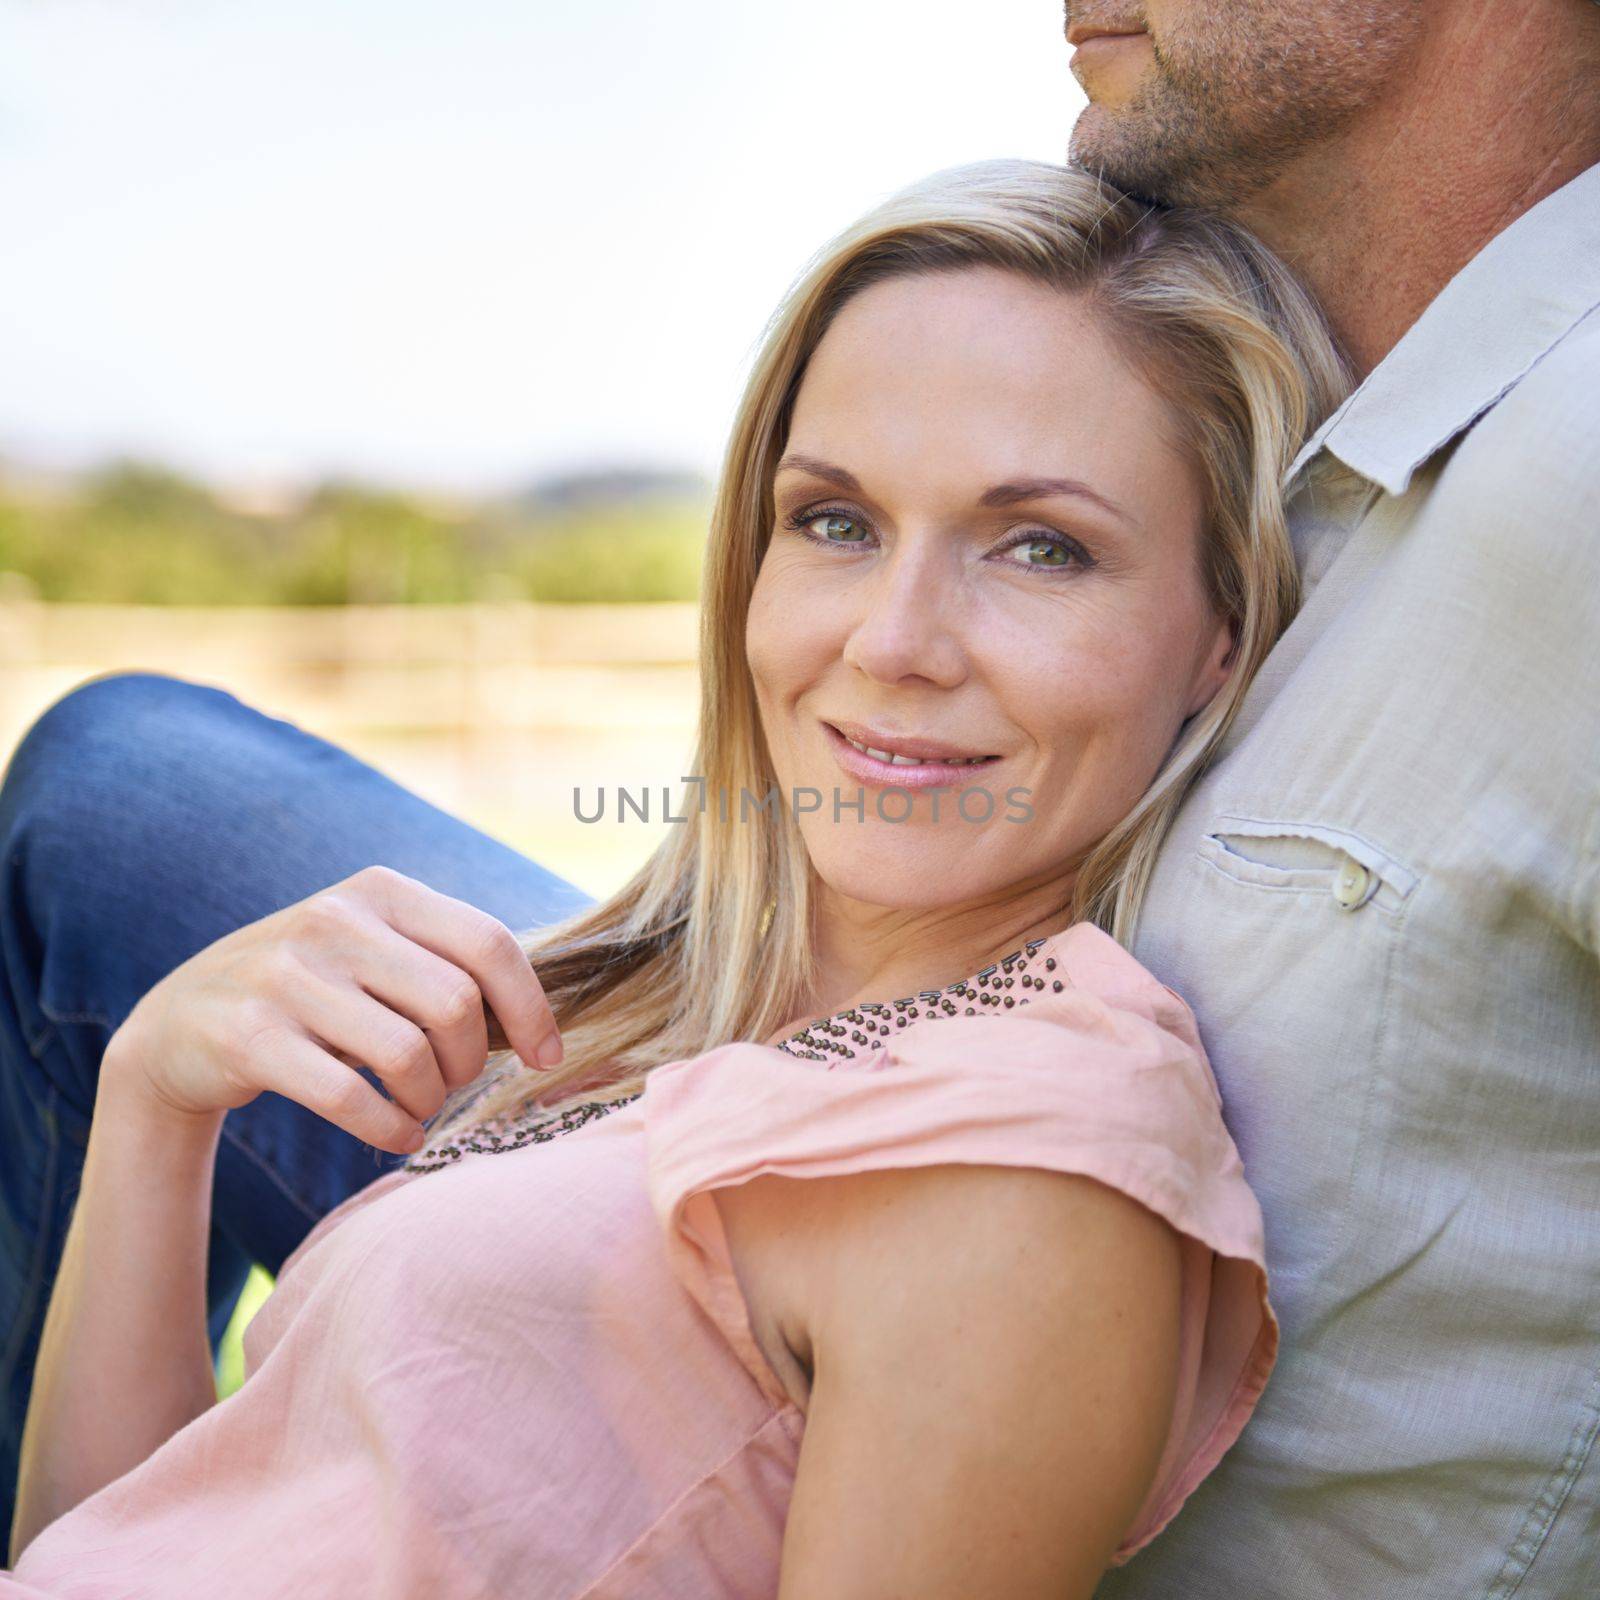 Being outdoors brings us closer together. Portrait of a happy mature couple enjoying a day outdoors